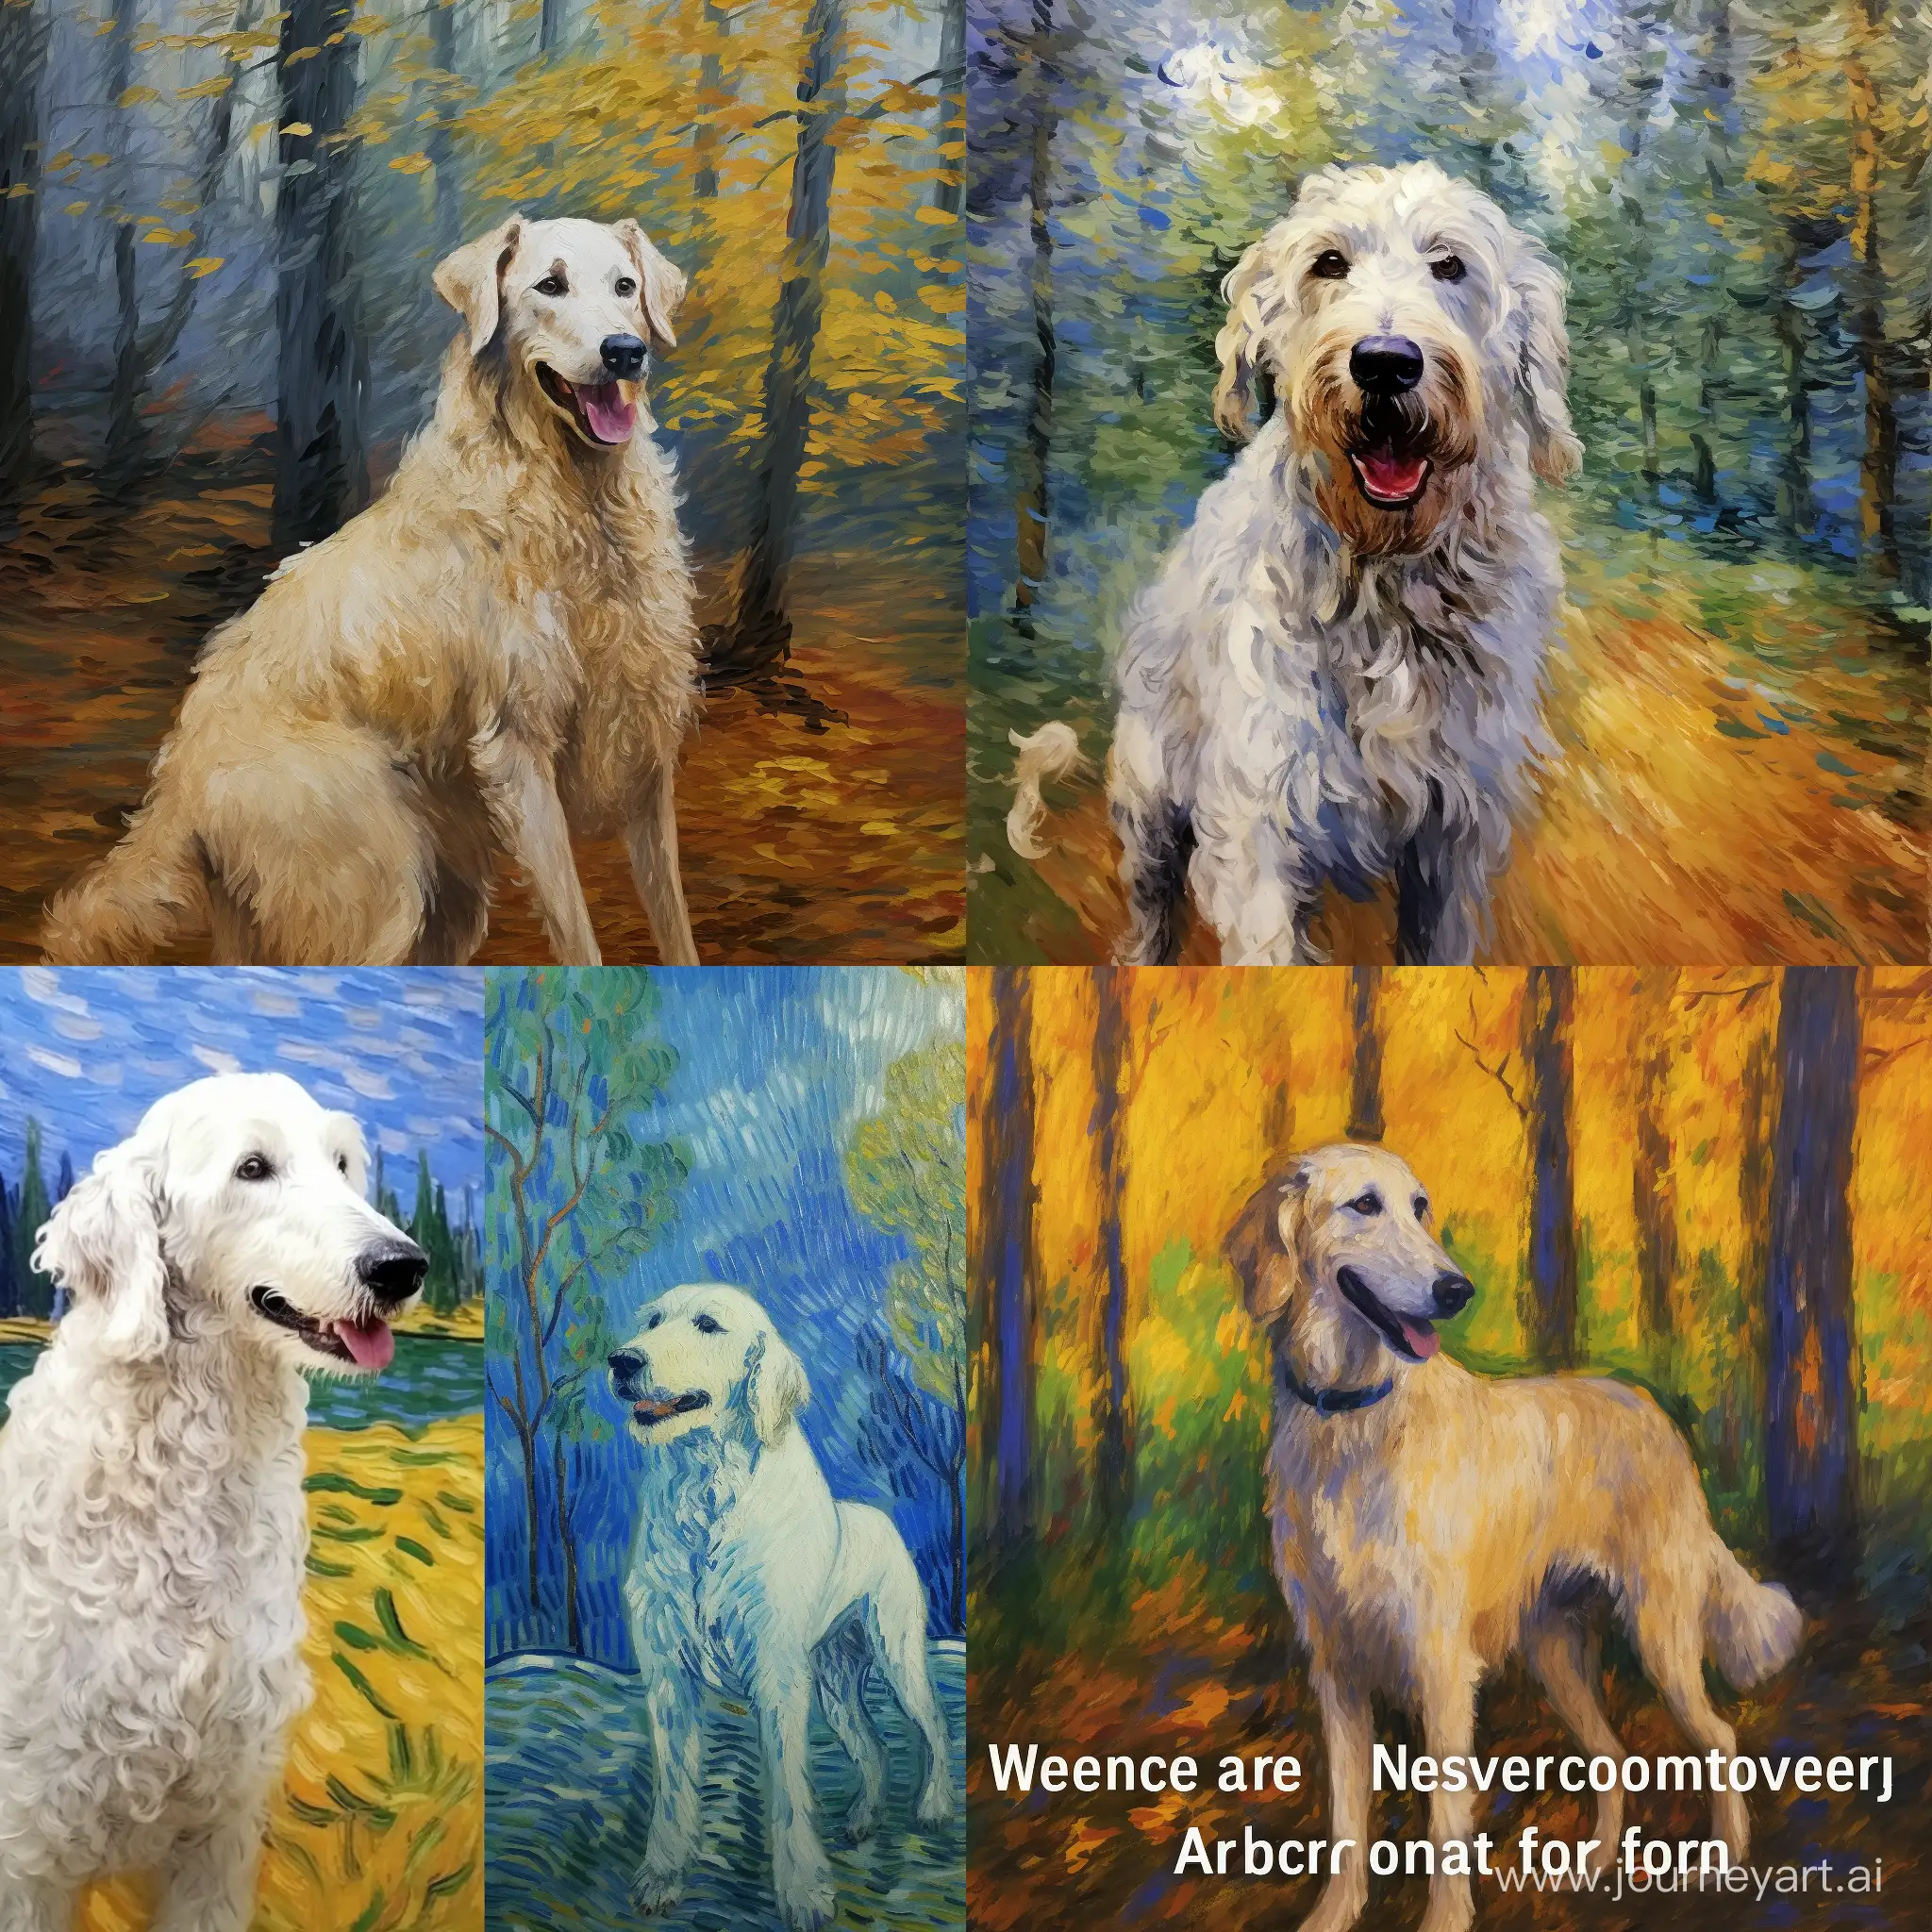  All these AI image generators take a text prompt and then turn it—as best they can—into a matching image. This opens up some wild possibilities, since your prompt can be anything from "an impressionist oil painting of a Canadian man riding a moose through a forest of maple trees" to "a painting in the style of Vermeer of a large fluffy Irish wolfhound enjoying a pint of beer in a traditional pub" or "a photograph of a donkey on the moon."